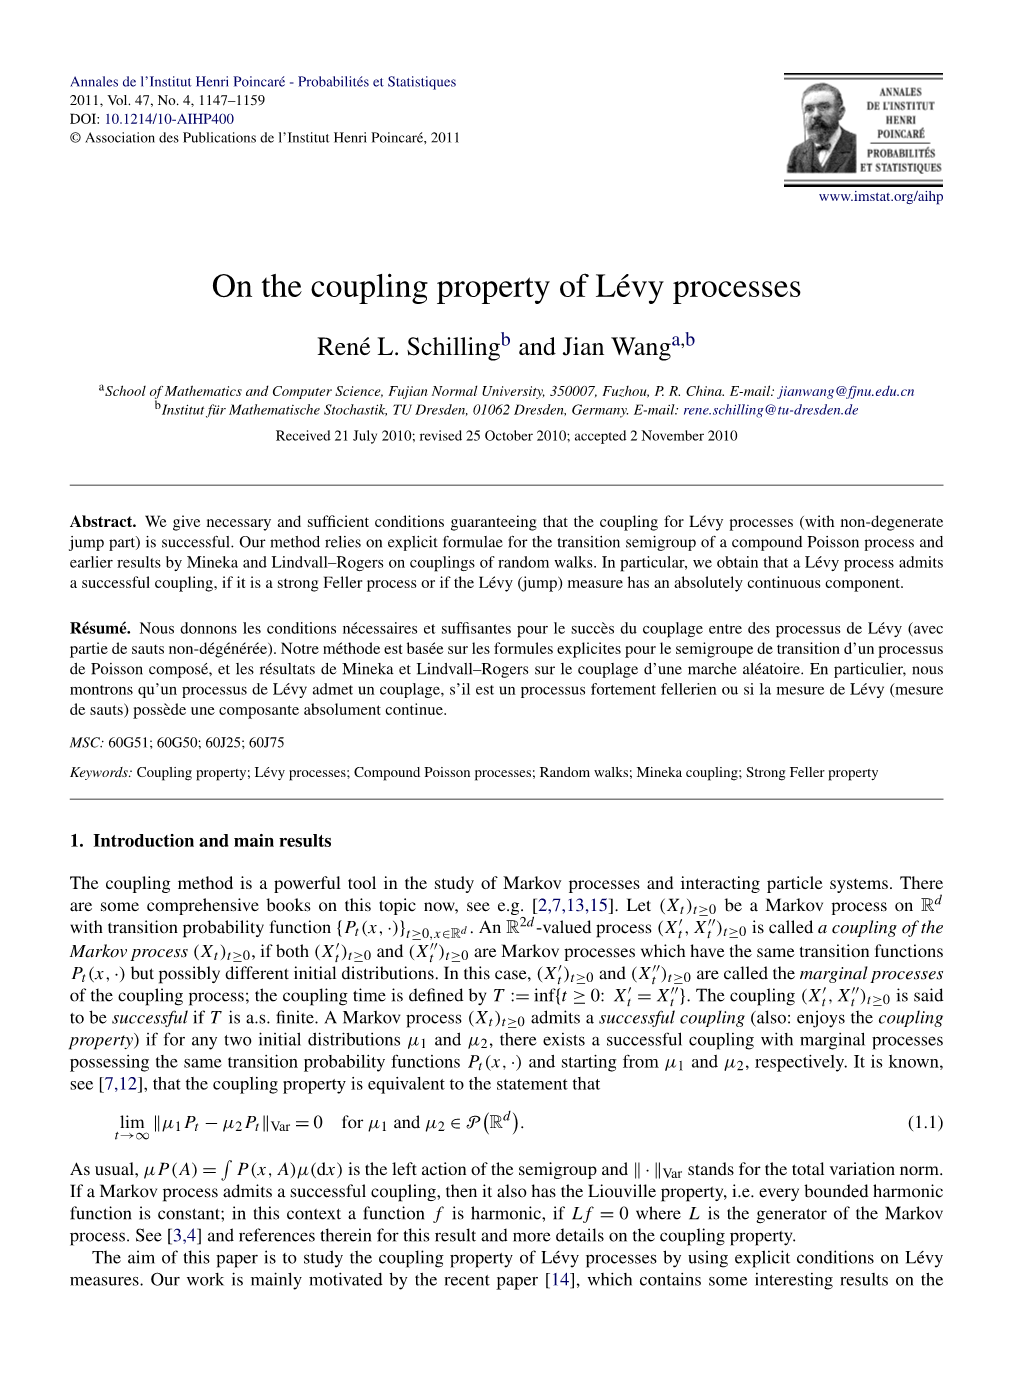 On the Coupling Property of Lévy Processes